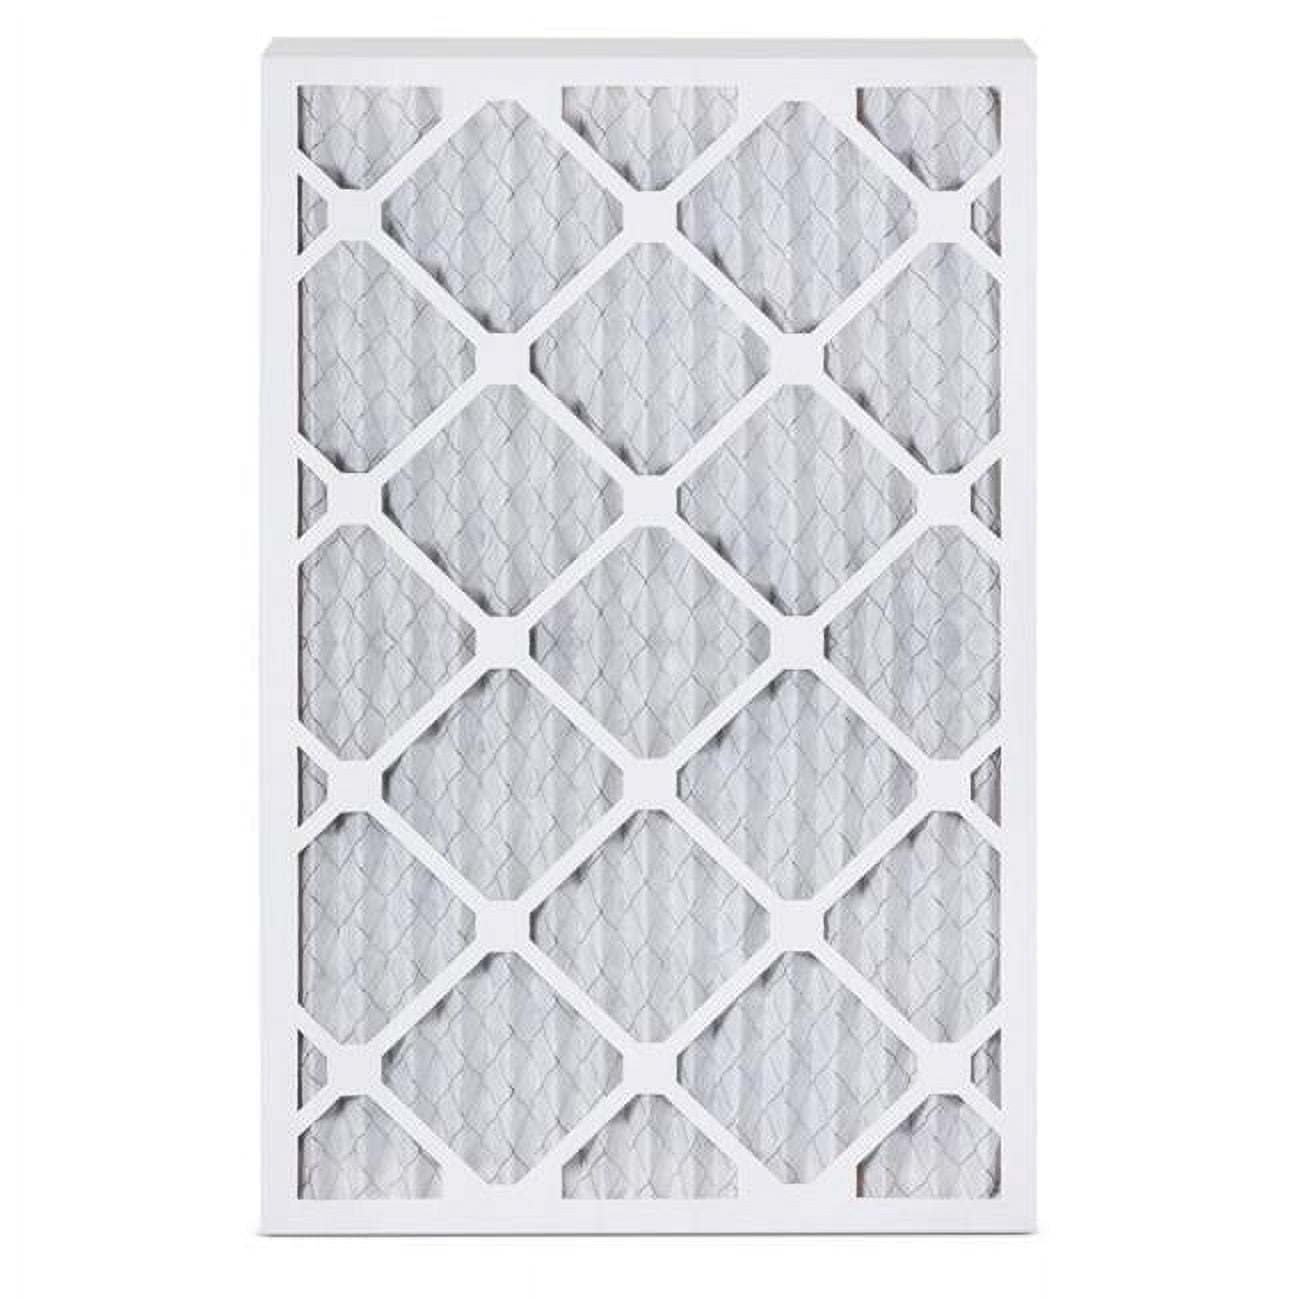 Picture of Bestair 4019882 14 x 25 x 2 in. Pro 8 MERV Pleated Air Filter - Pack of 6